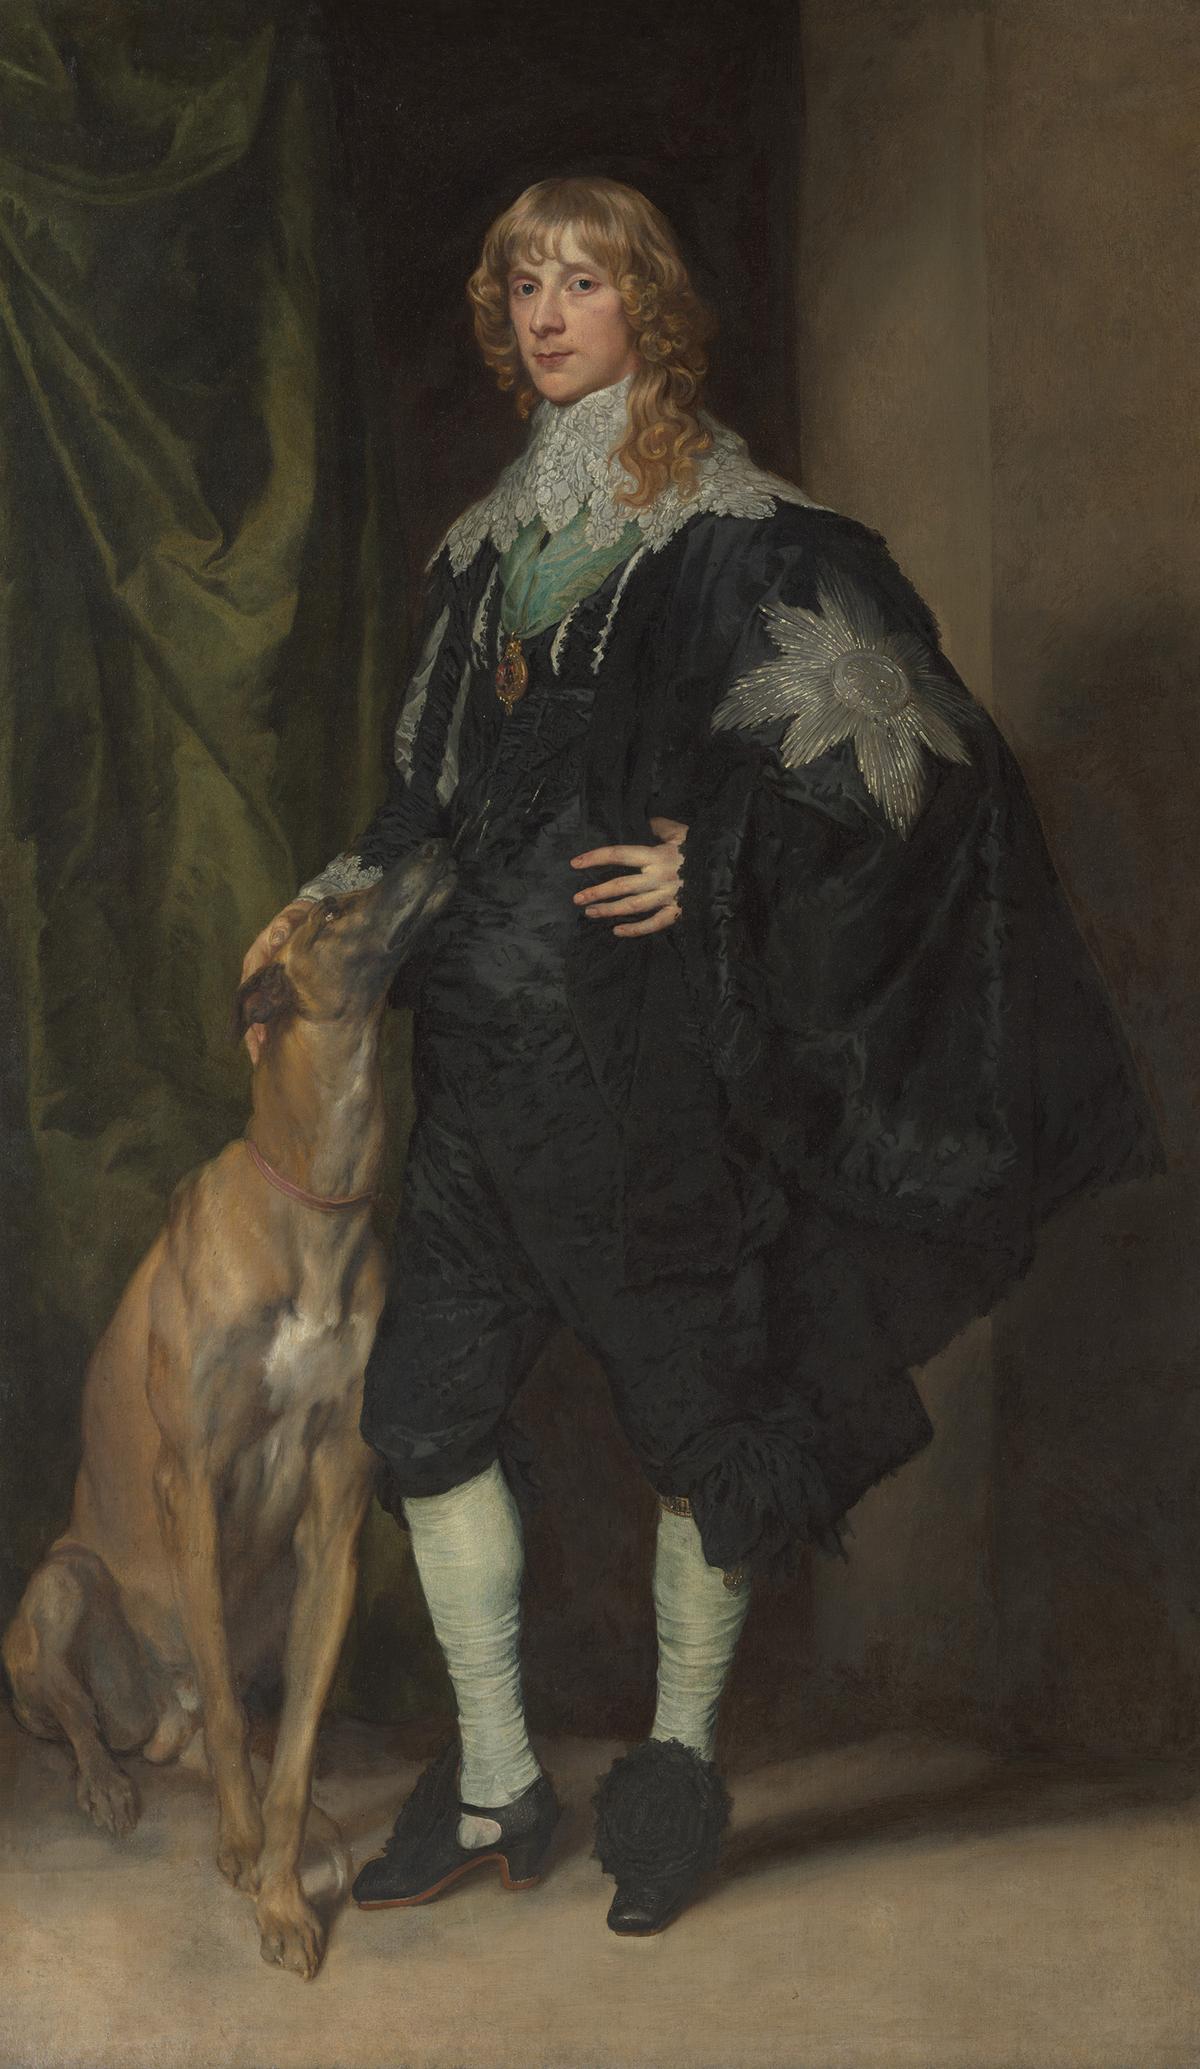 "James Stuart (1612–1655), Duke of Richmond and Lennox," circa 1633–1635, by Anthony van Dyck. Oil on canvas; 85 inches by 50 1/4 inches. The Metropolitan Museum of Art, New York City. (Public Domain)